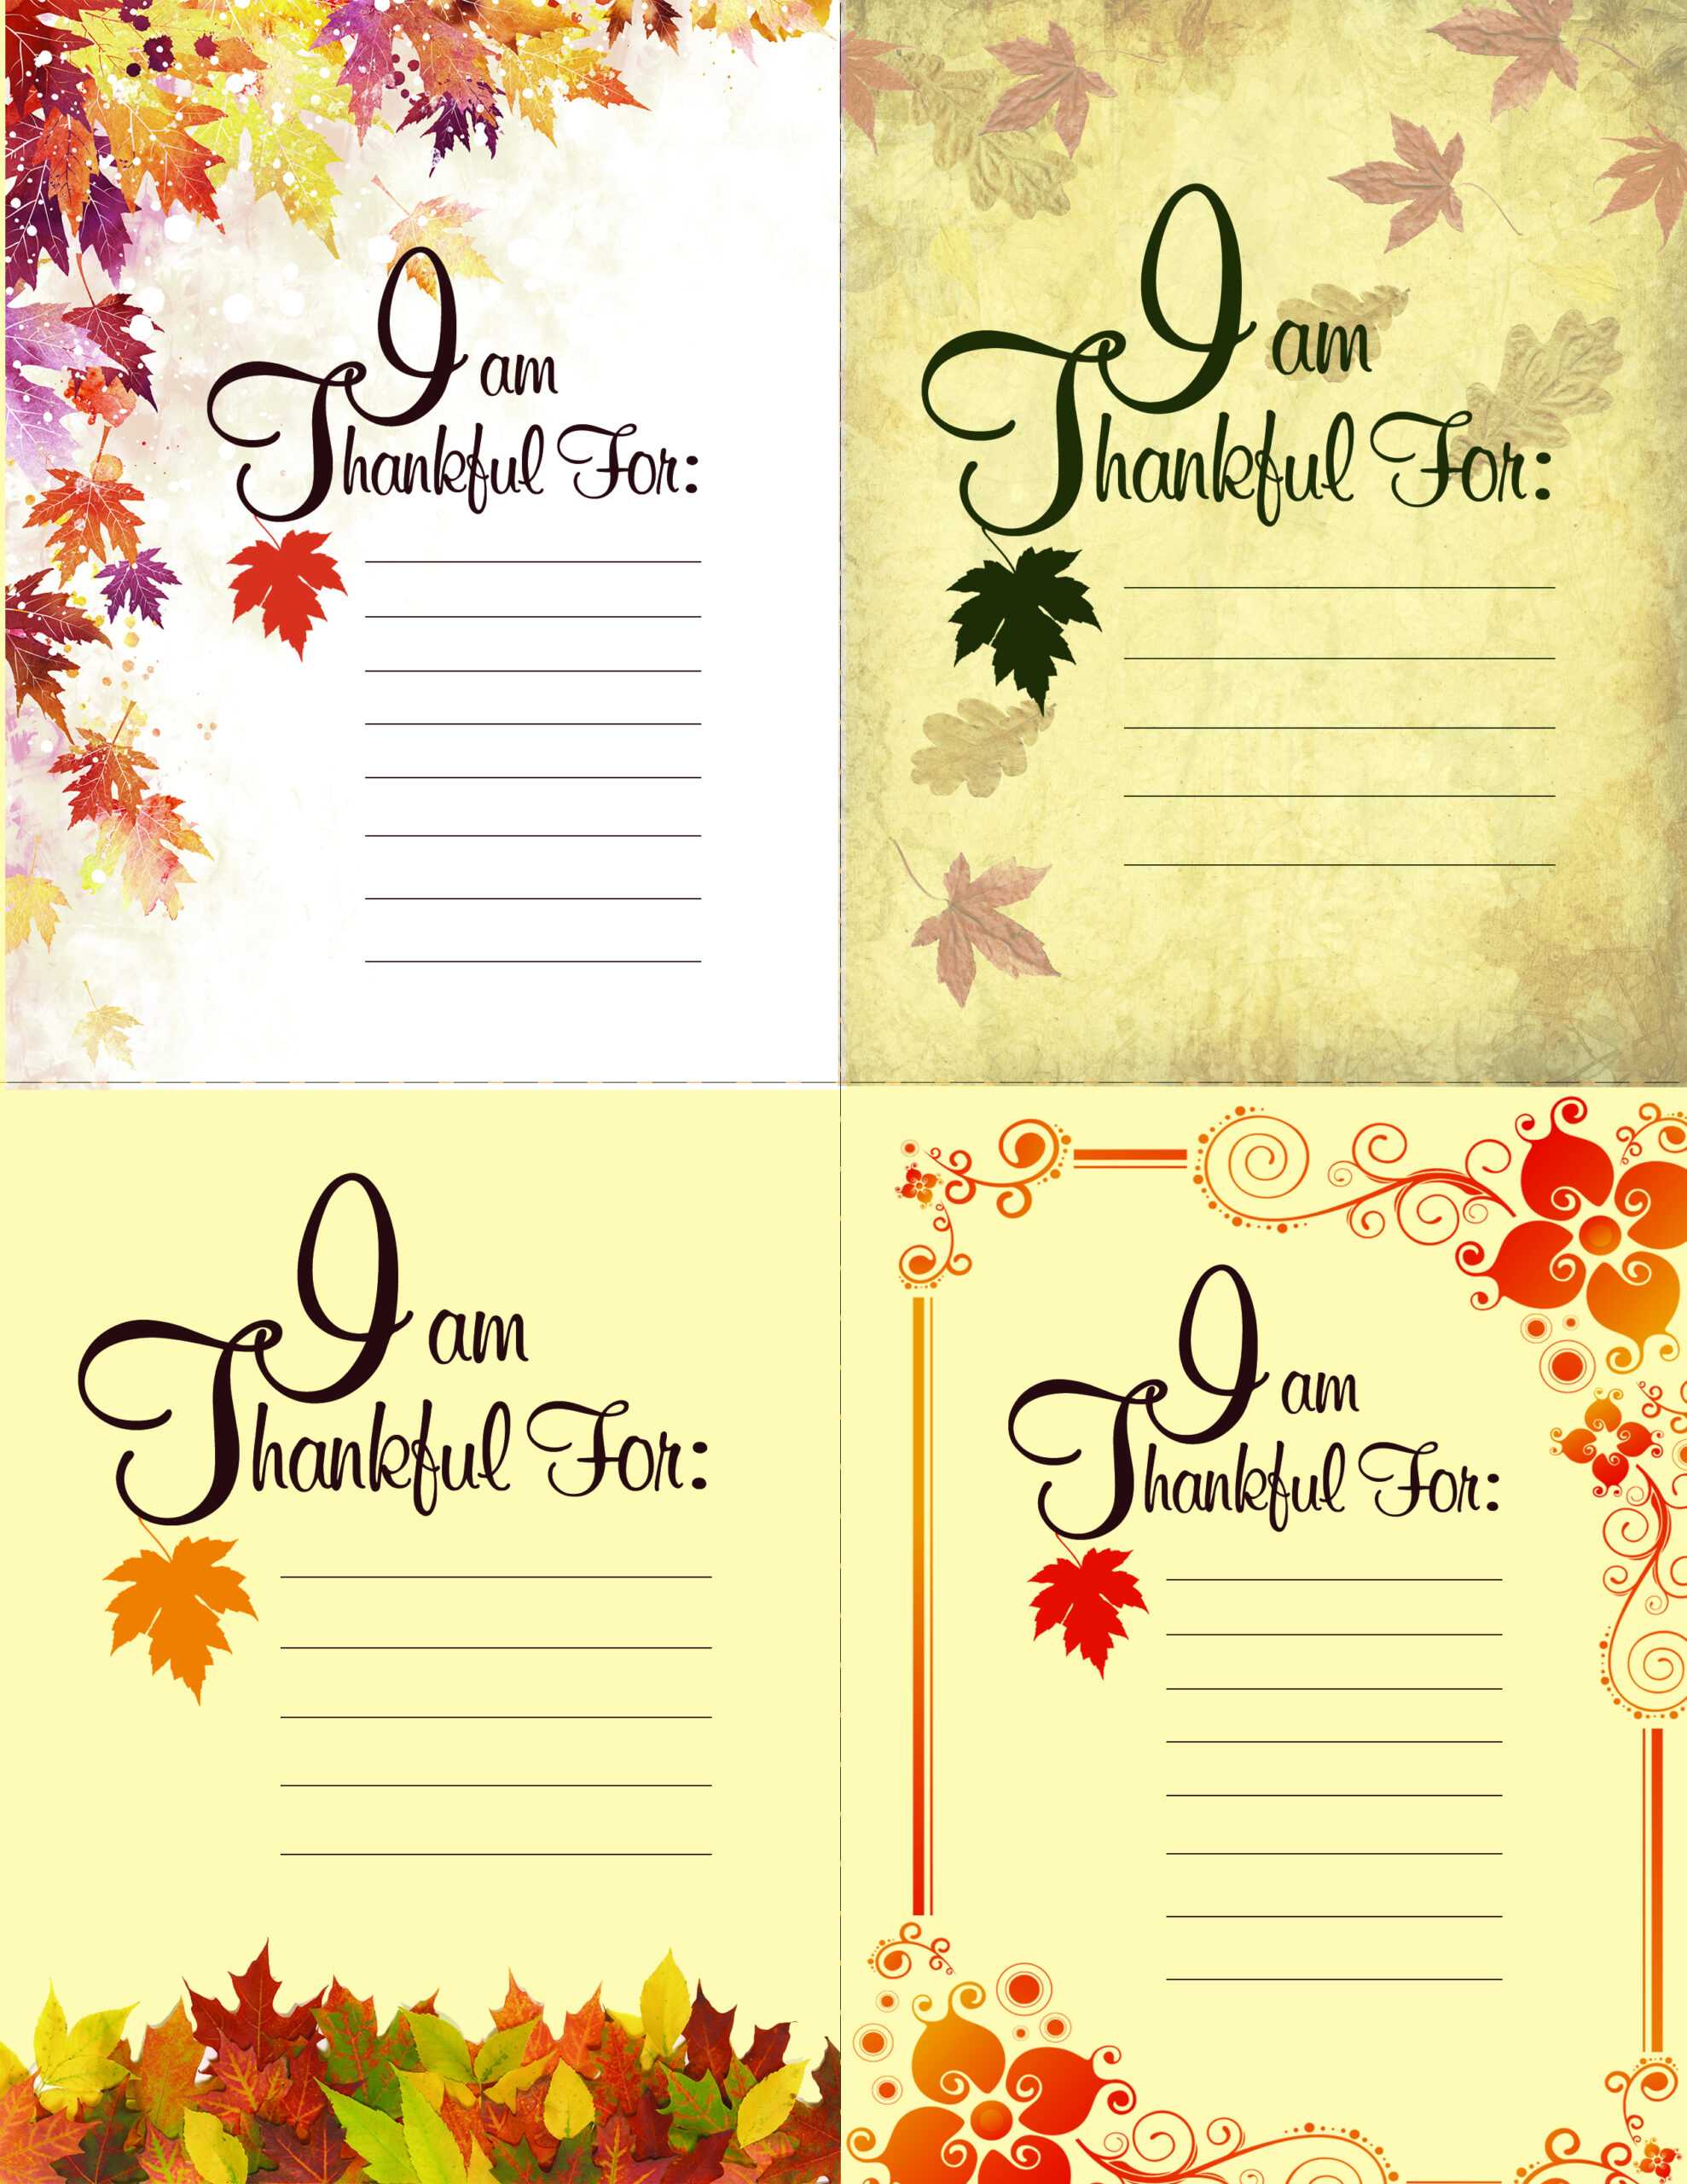 Printable Thanksgiving Place Setting Cards | Blue Mountain Within Thanksgiving Place Card Templates